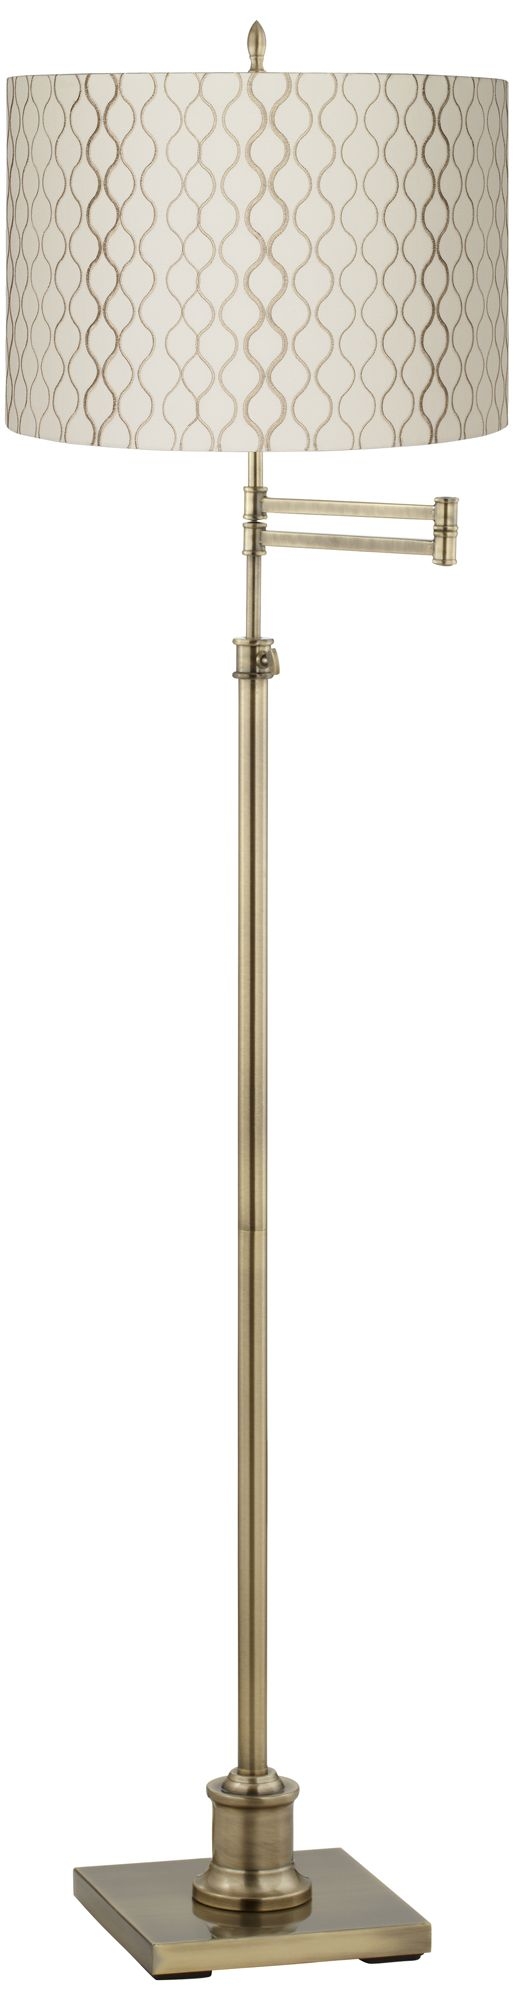 Westbury Embroidered Hourglass Brass Swing Arm Floor Lamp - Image 0